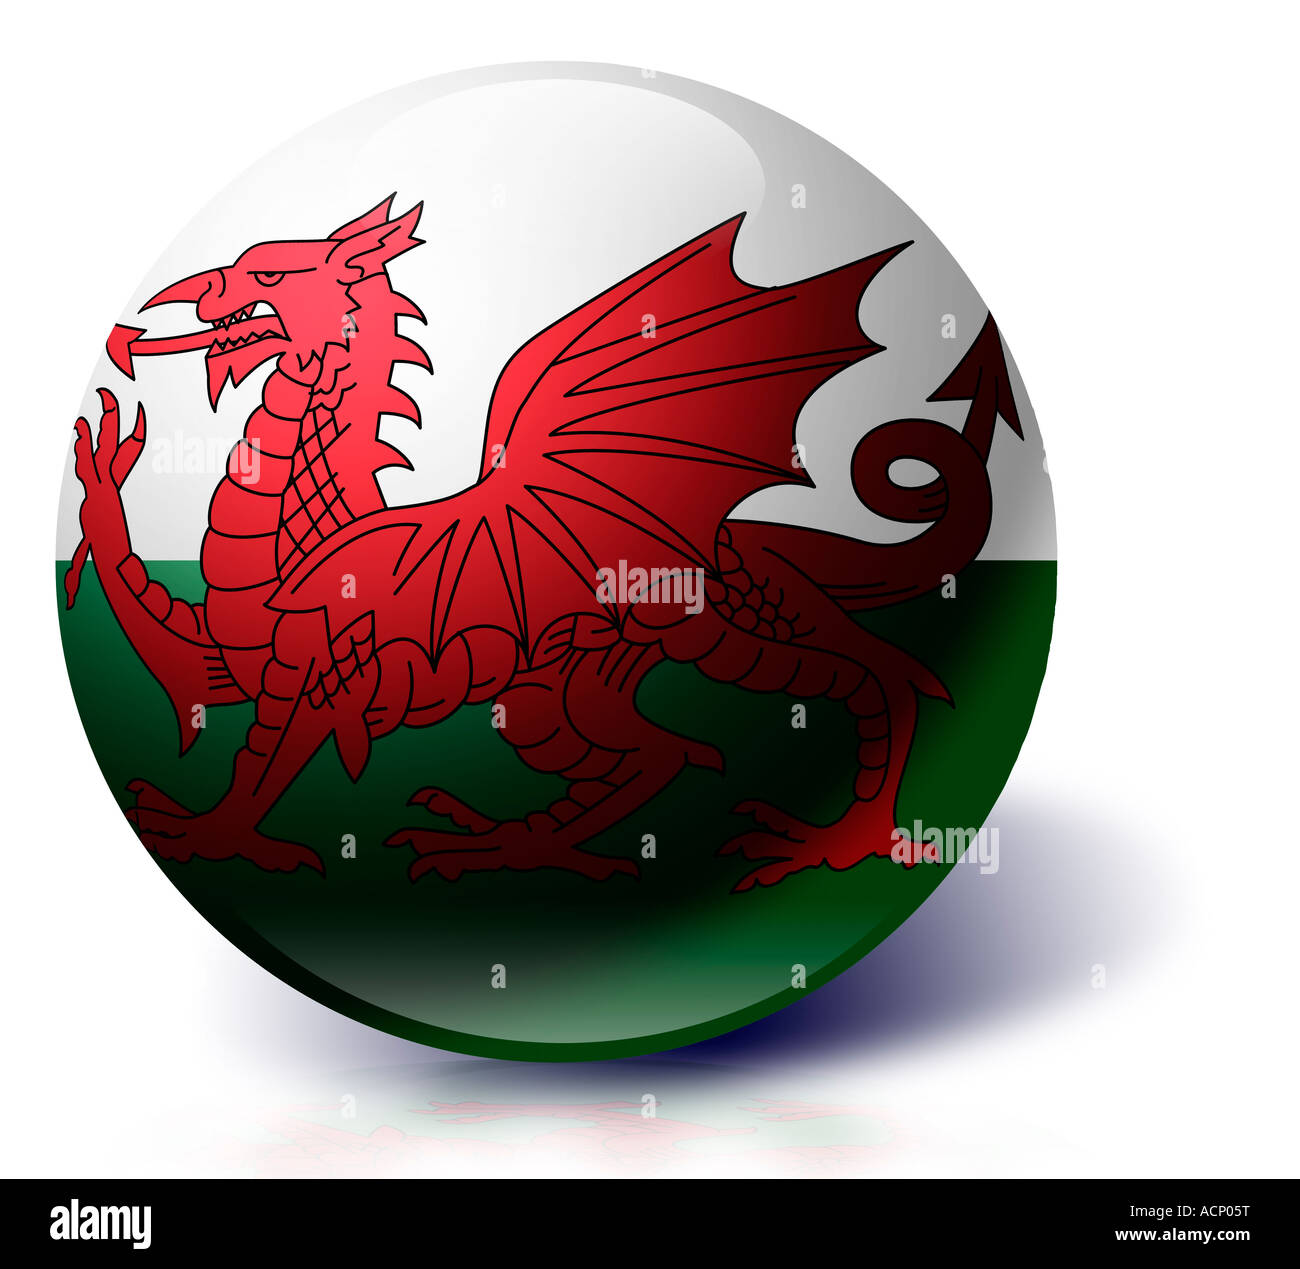 Wales flag as a glass ball Stock Photo